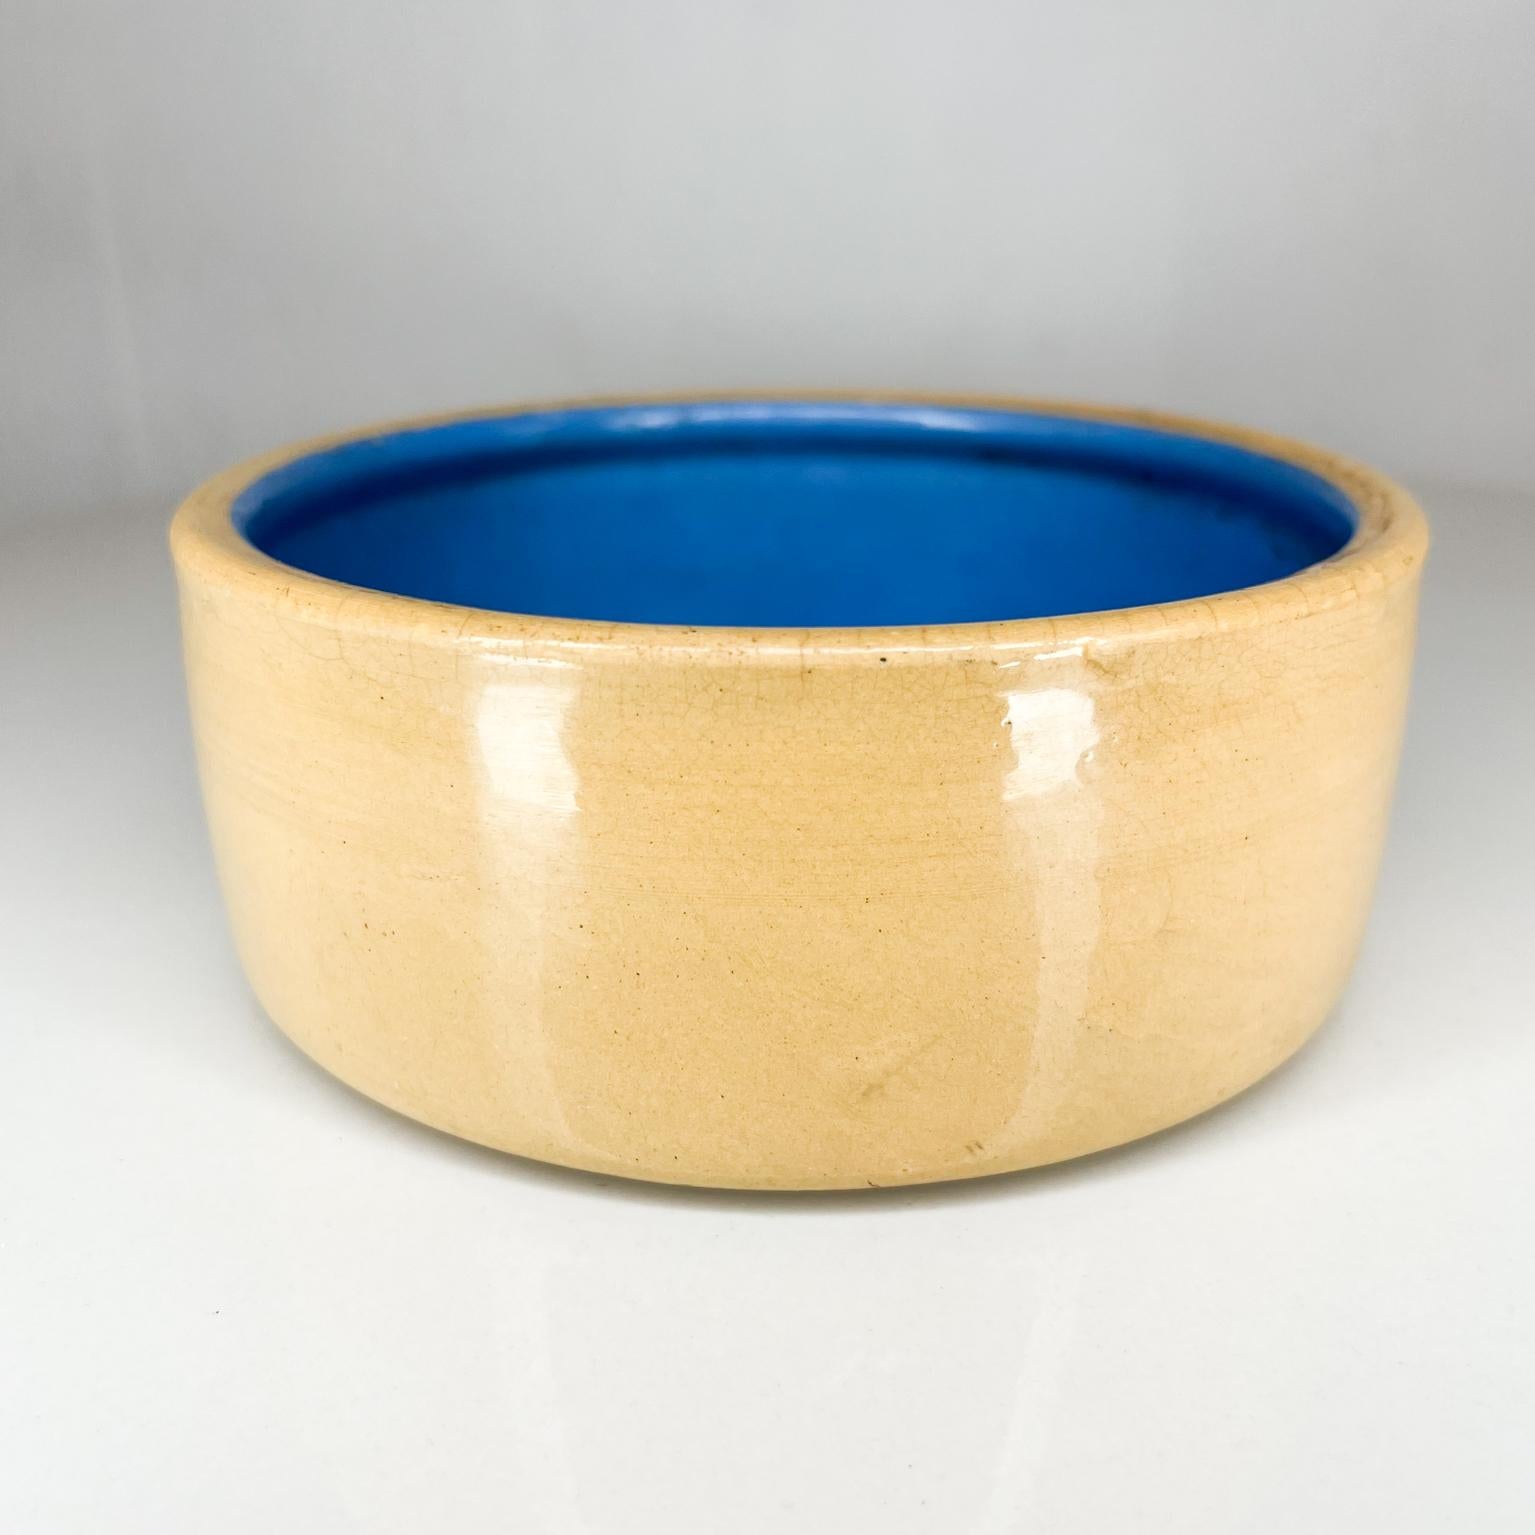 1960s Vintage Dreamy Blue Tan Ceramic Bowl made in England In Good Condition For Sale In Chula Vista, CA